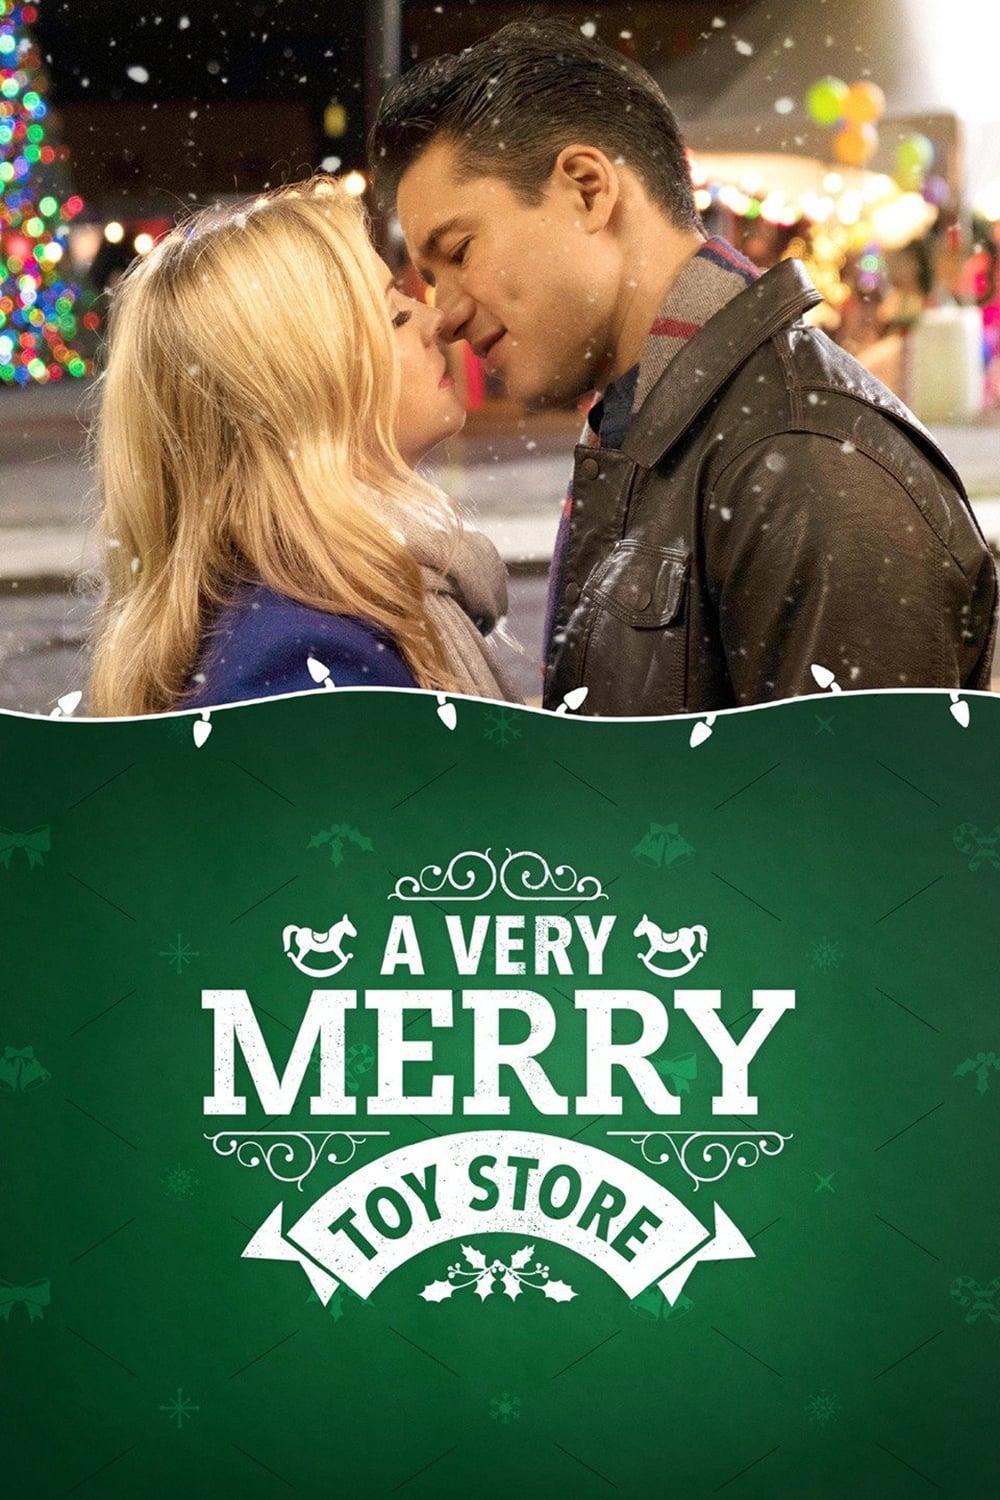 A Very Merry Toy Store poster